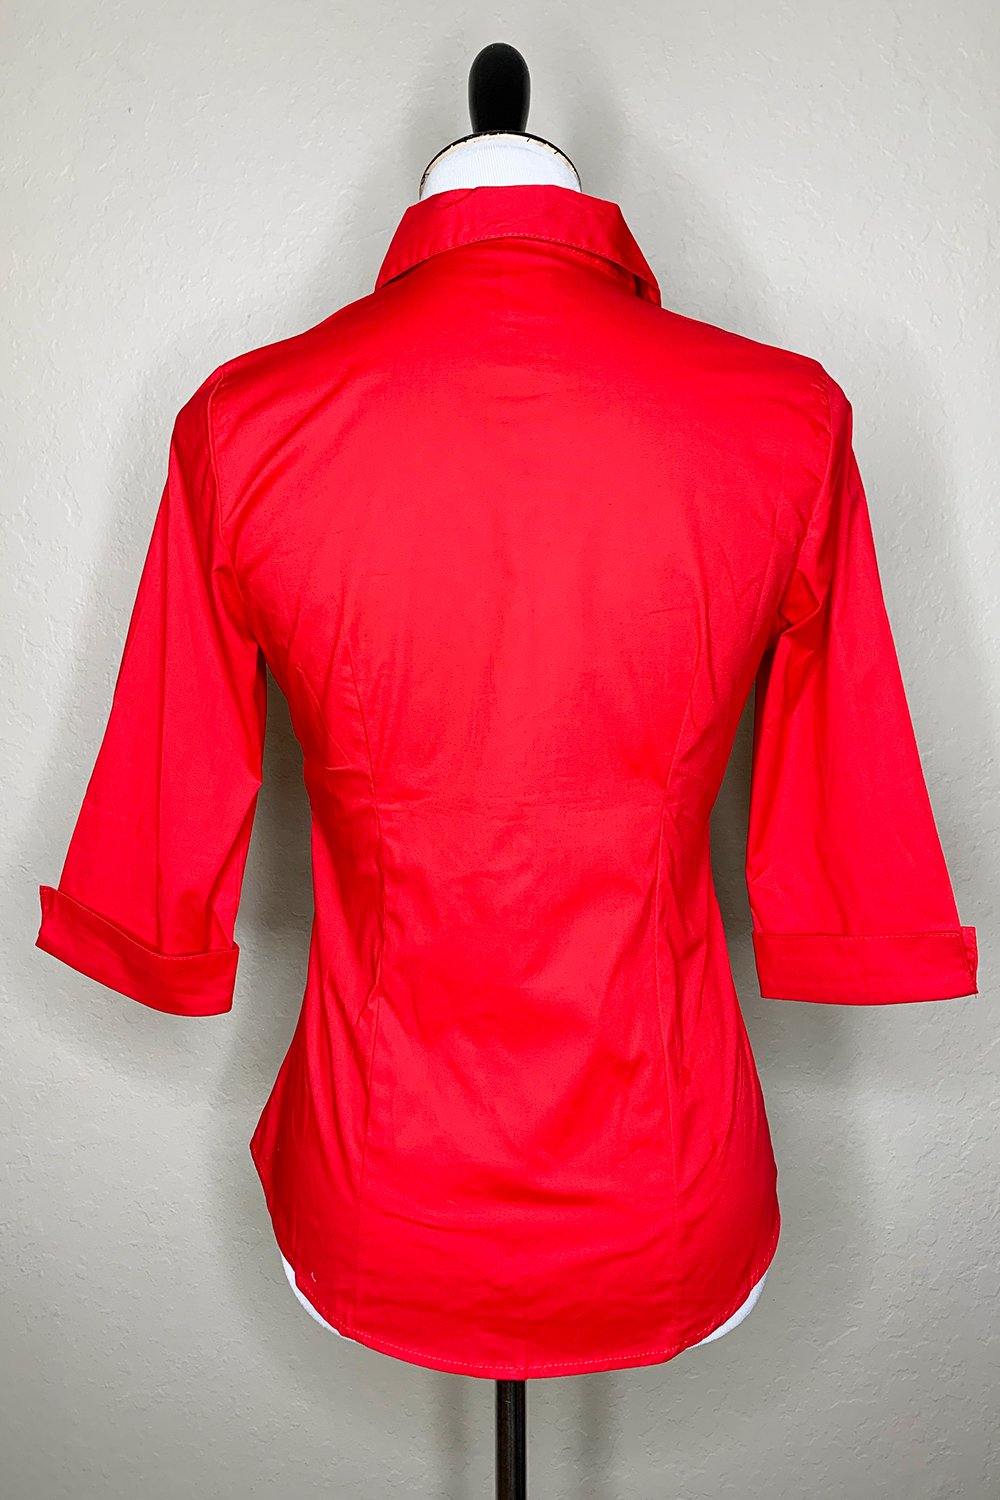 The Quintessential Blouse in Red - The Oblong Box Shop